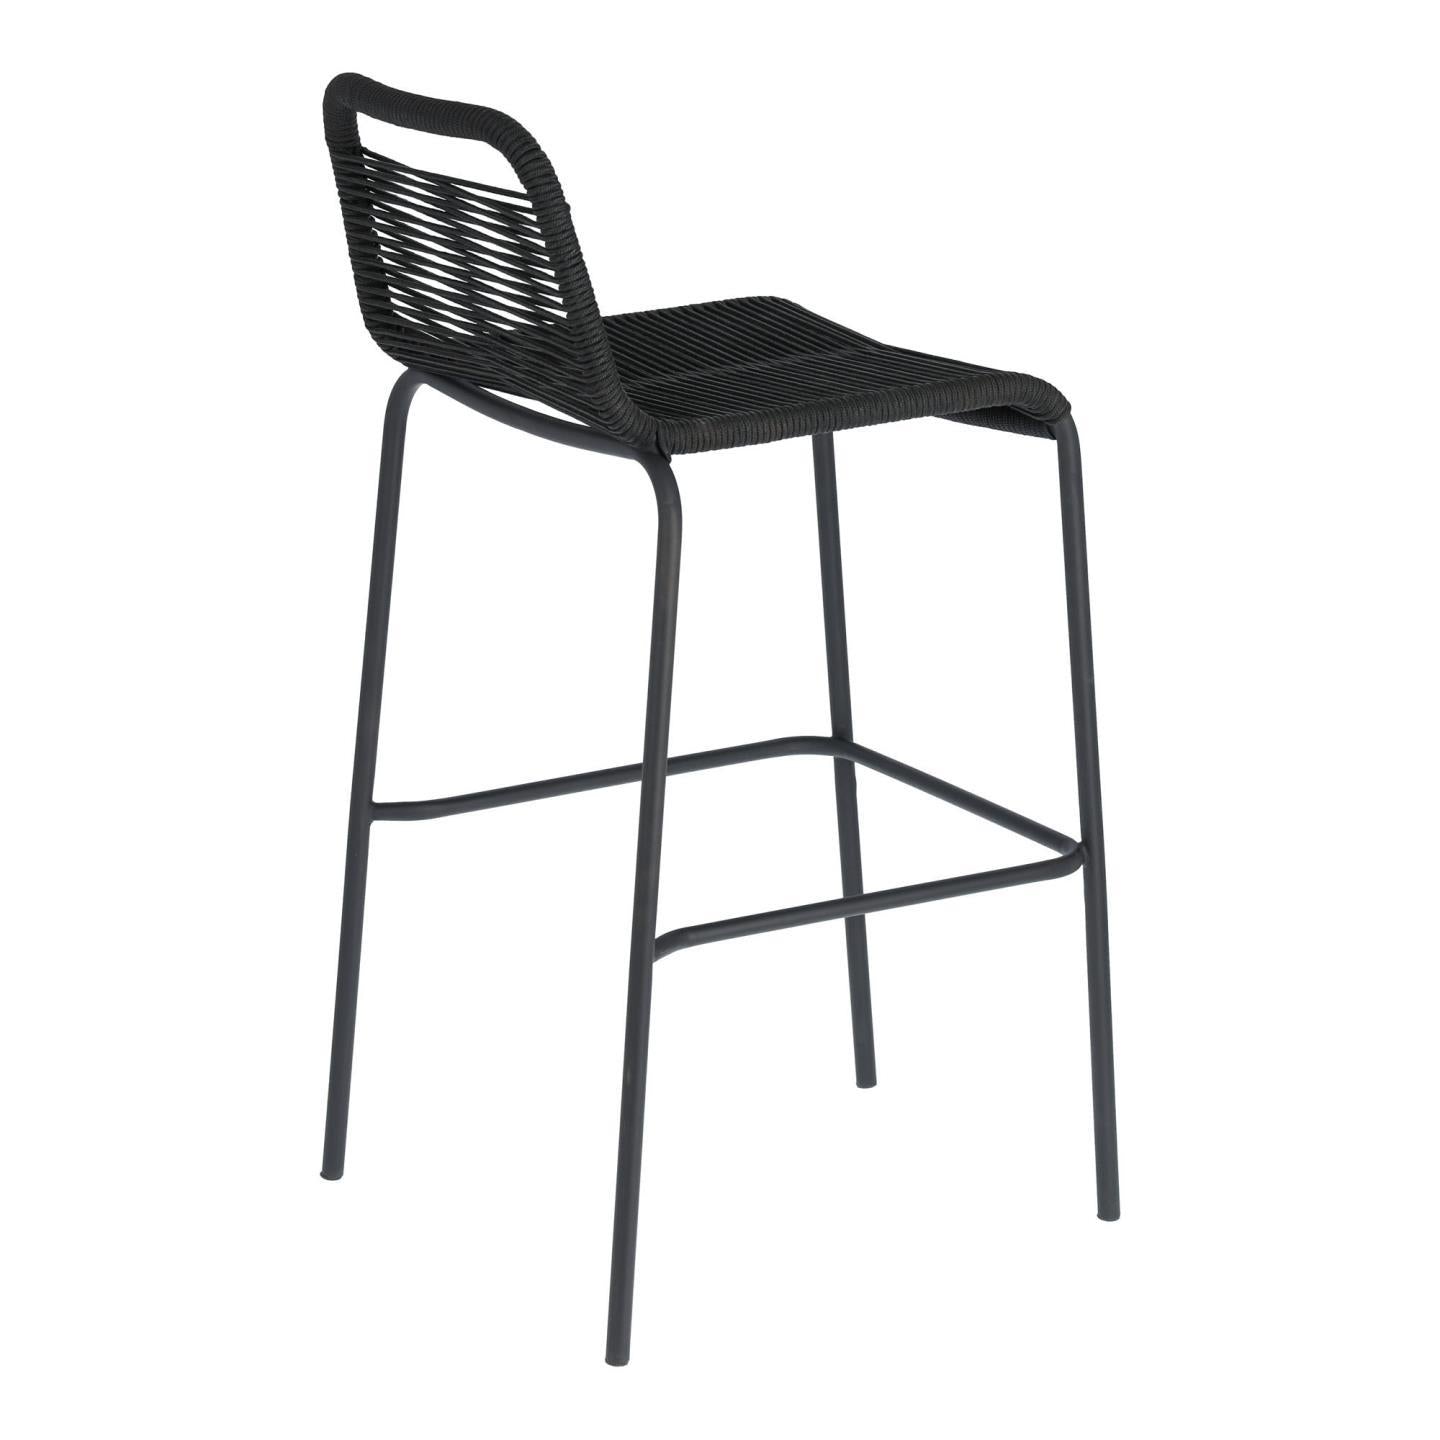 Lambton stackable stool in black rope and black finish steel, 74 cm